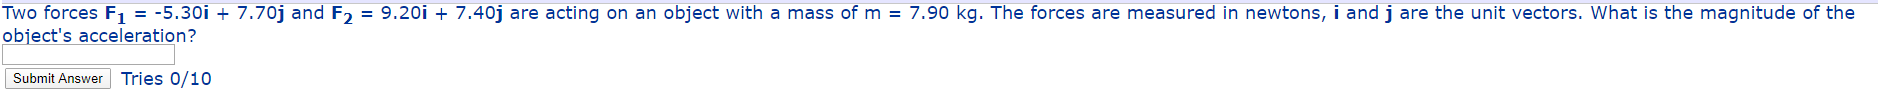 Two forces F = -5.30i + 7.70j and F, = 9.20i + 7.40j are acting on an object with a mass of m = 7.90 kg. The forces are measured in newtons, i and j are the unit vectors. What is the magnitude of the
object's acceleration?
Submit Answer Tries 0/10
